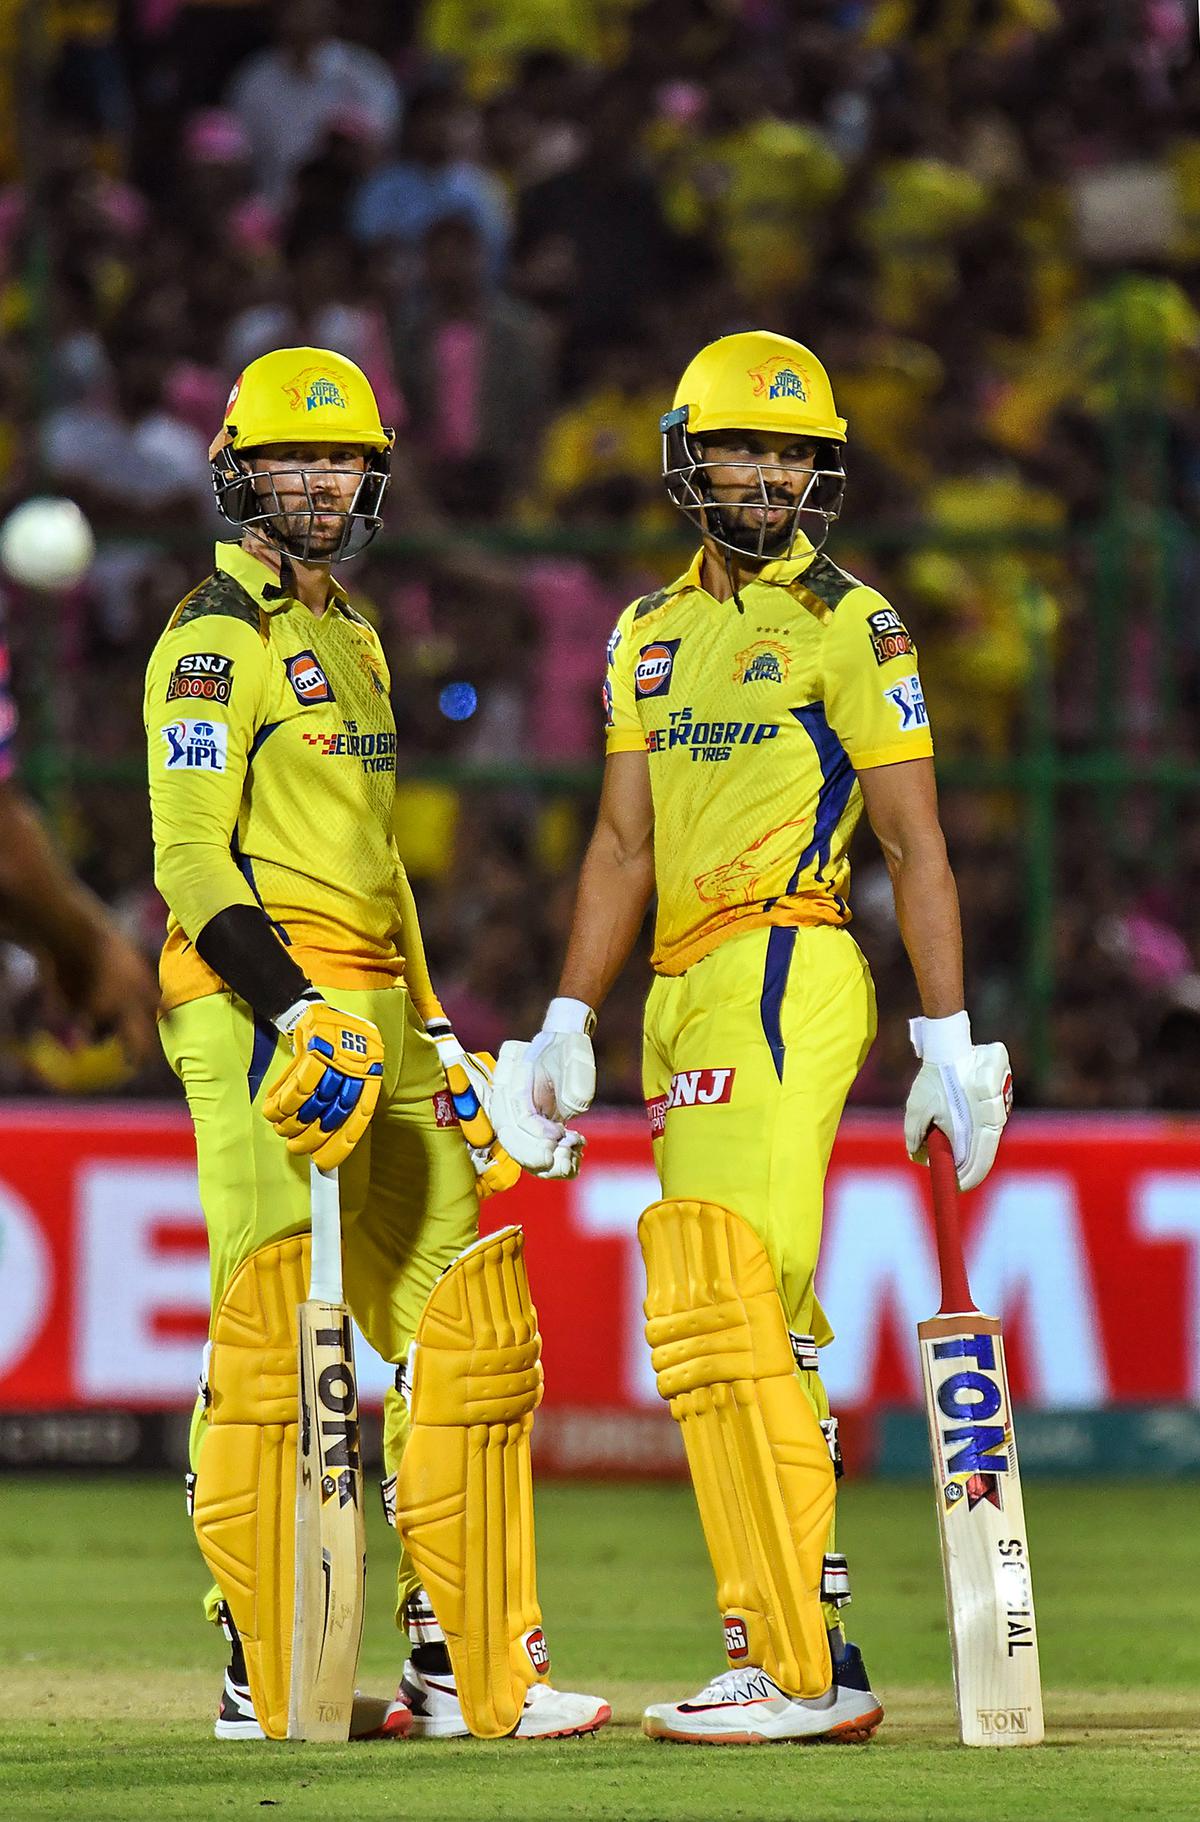 Gaikwad and Conway have been in good form for CSK.